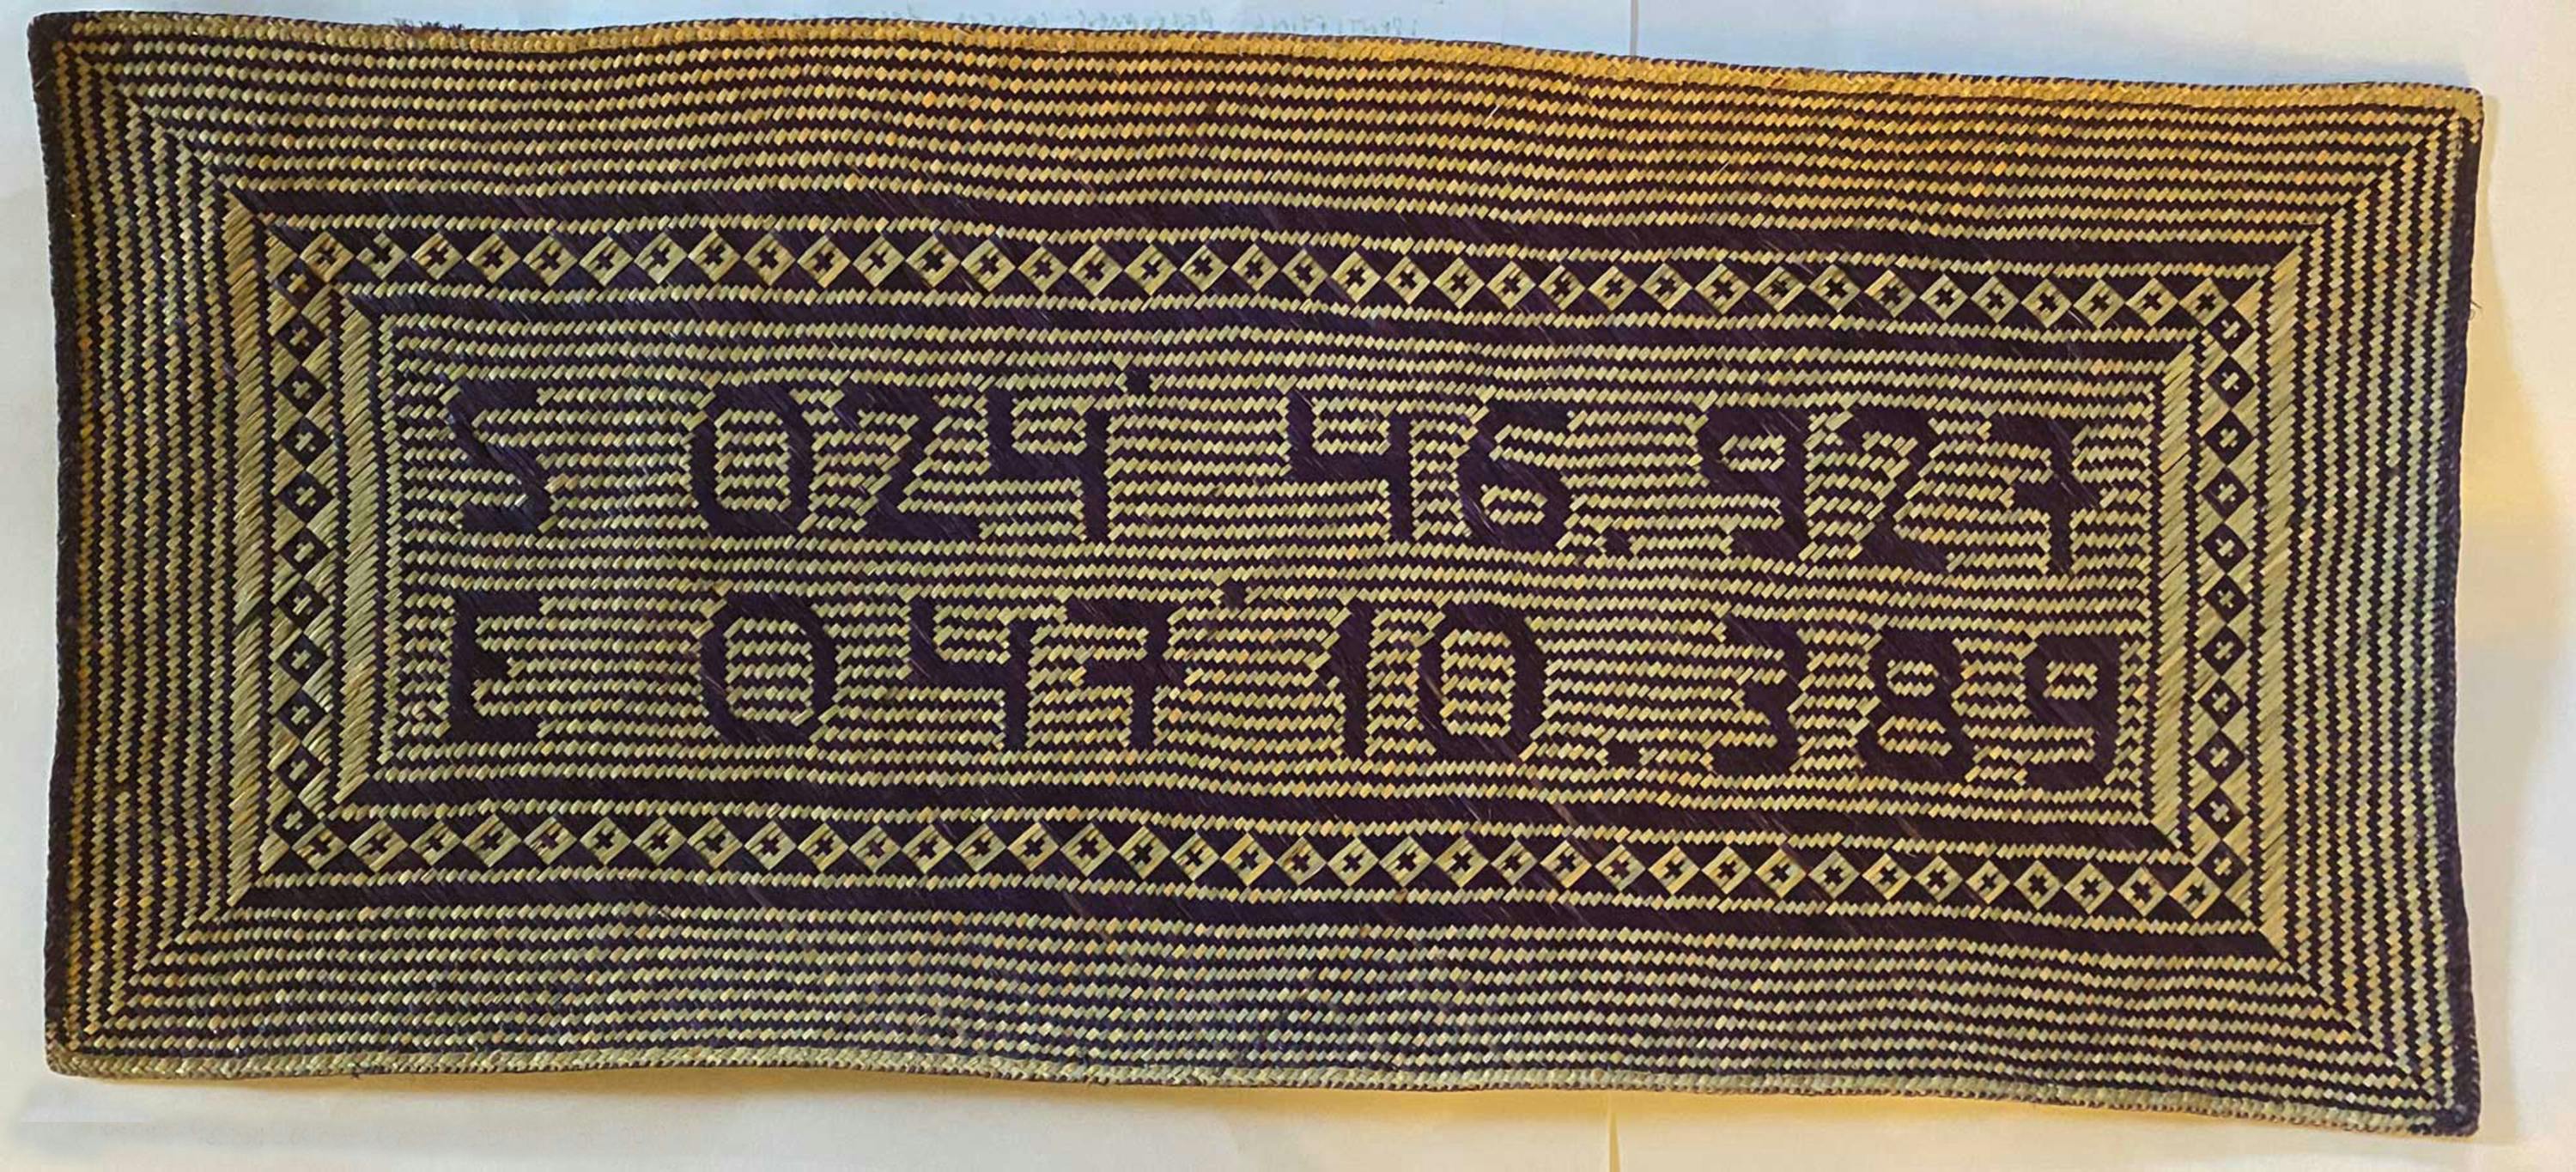 Pete Gomes, House of the Weaver, 2006, Traditional woven Malagsy reed mat with GPS coordinates, Edition of 2, Photo: courtesy of the artist